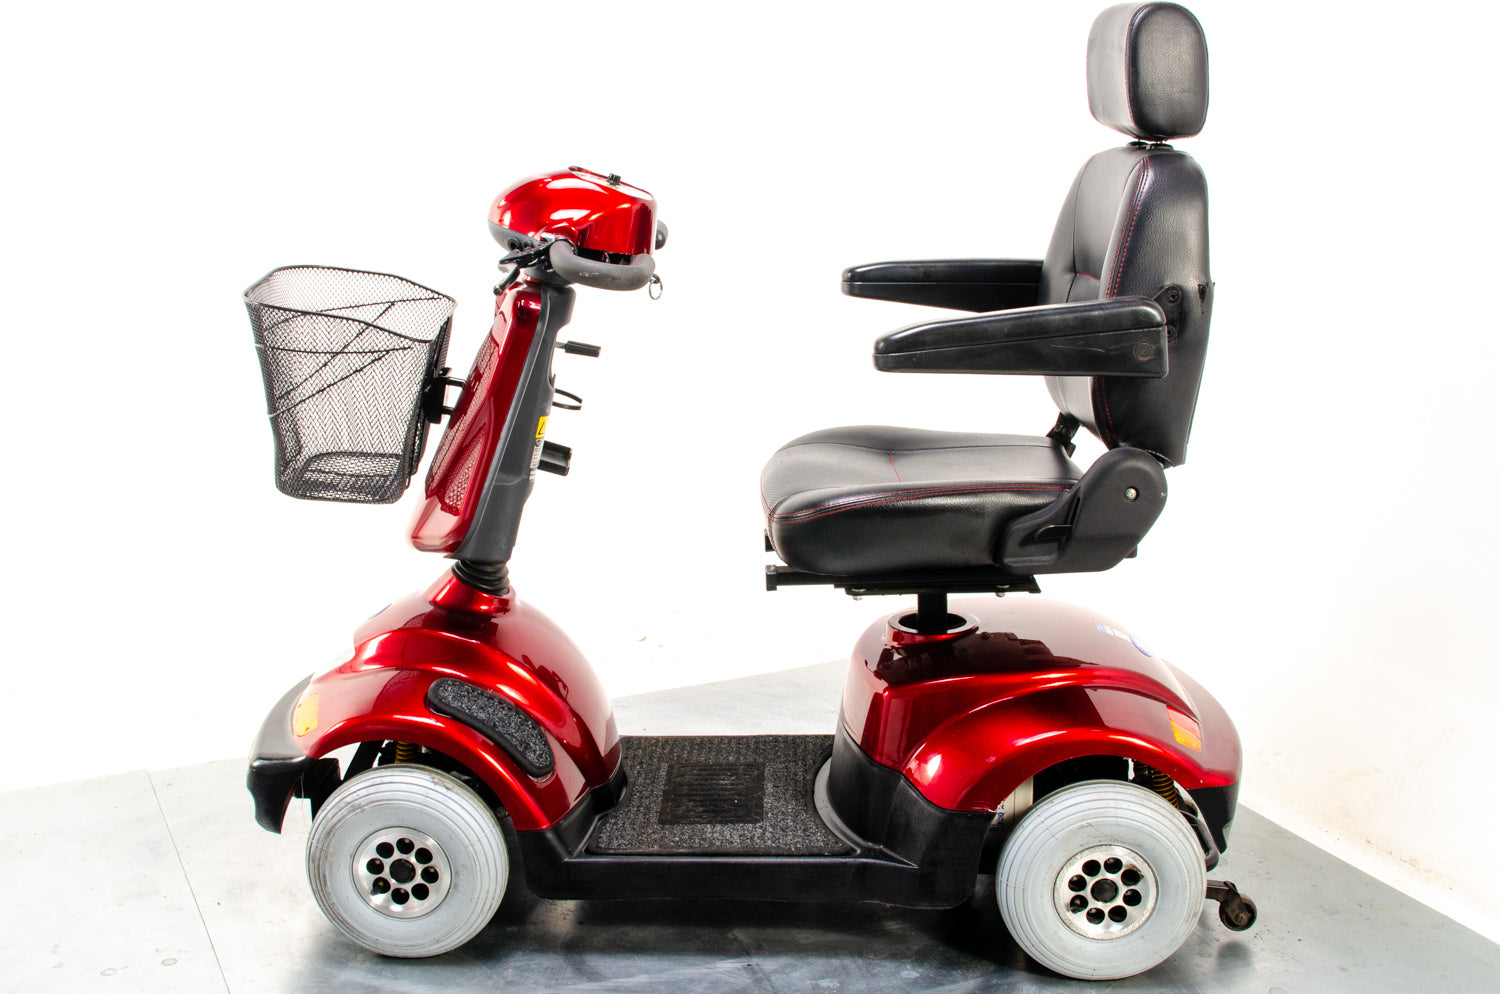 TGA Sonet Used Mobility Scooter 6mph Road Pavement 25 Stone Comfy Red 13338